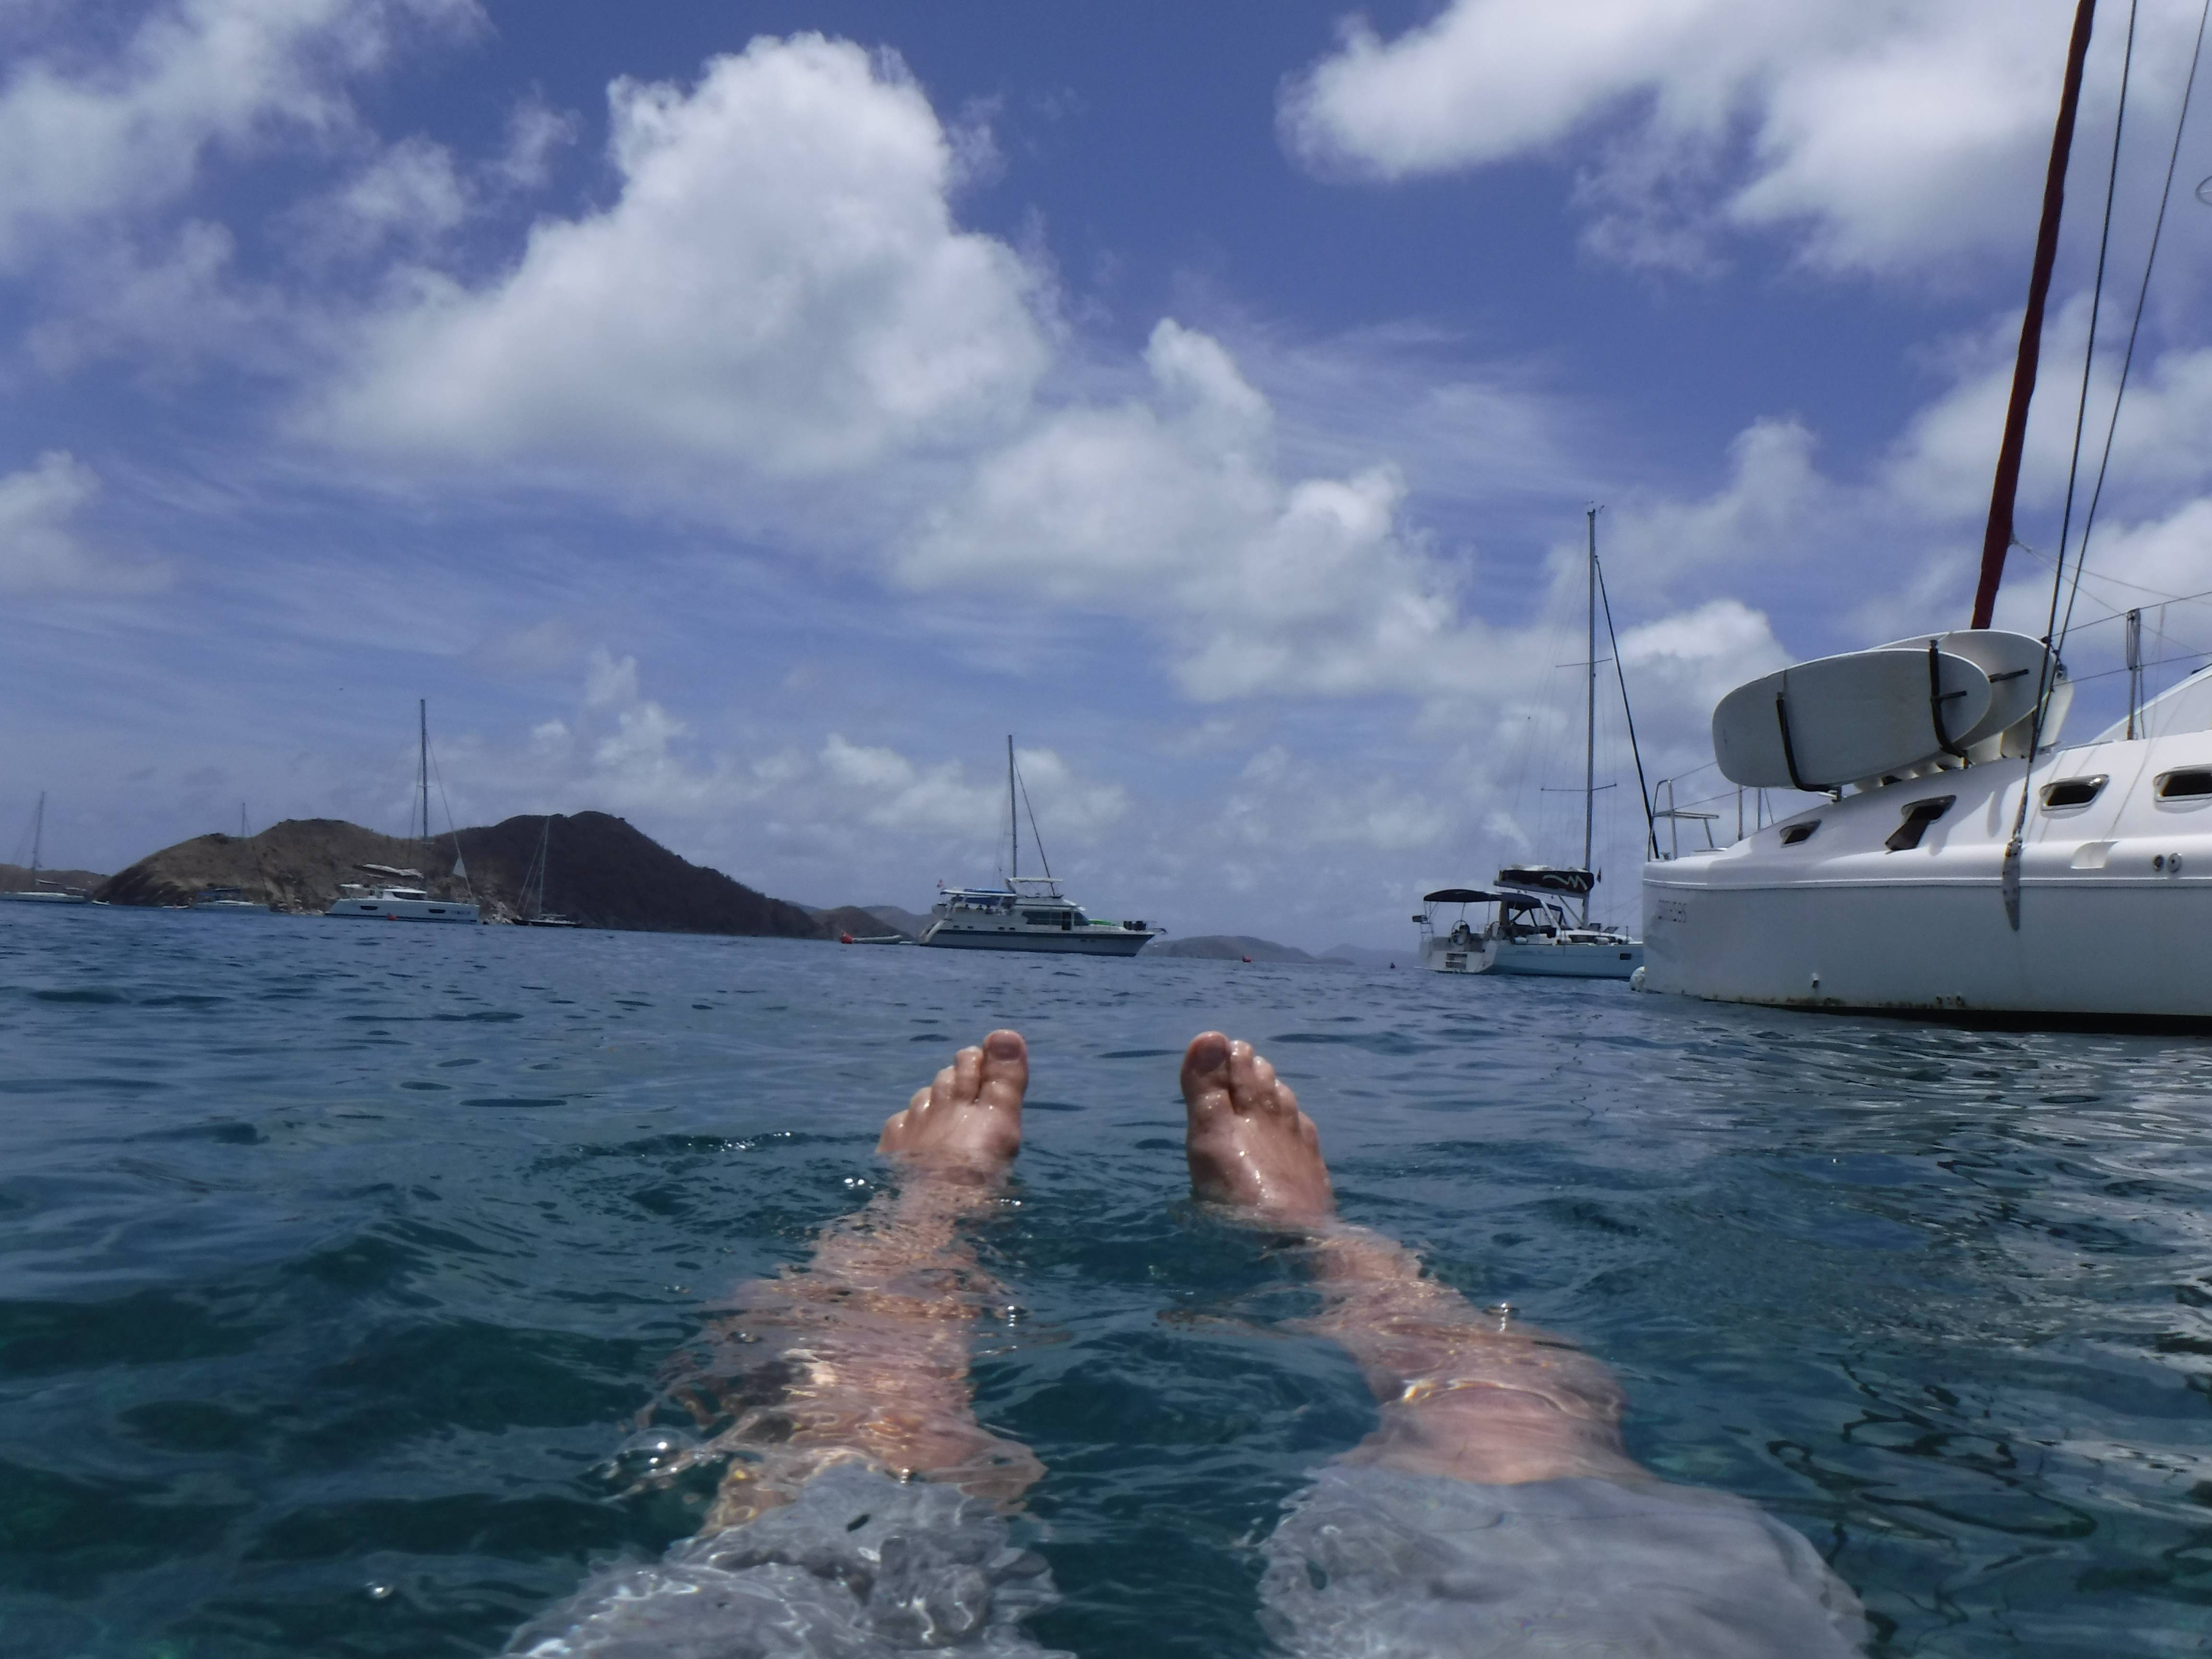 POV of person in water and a Catamaran